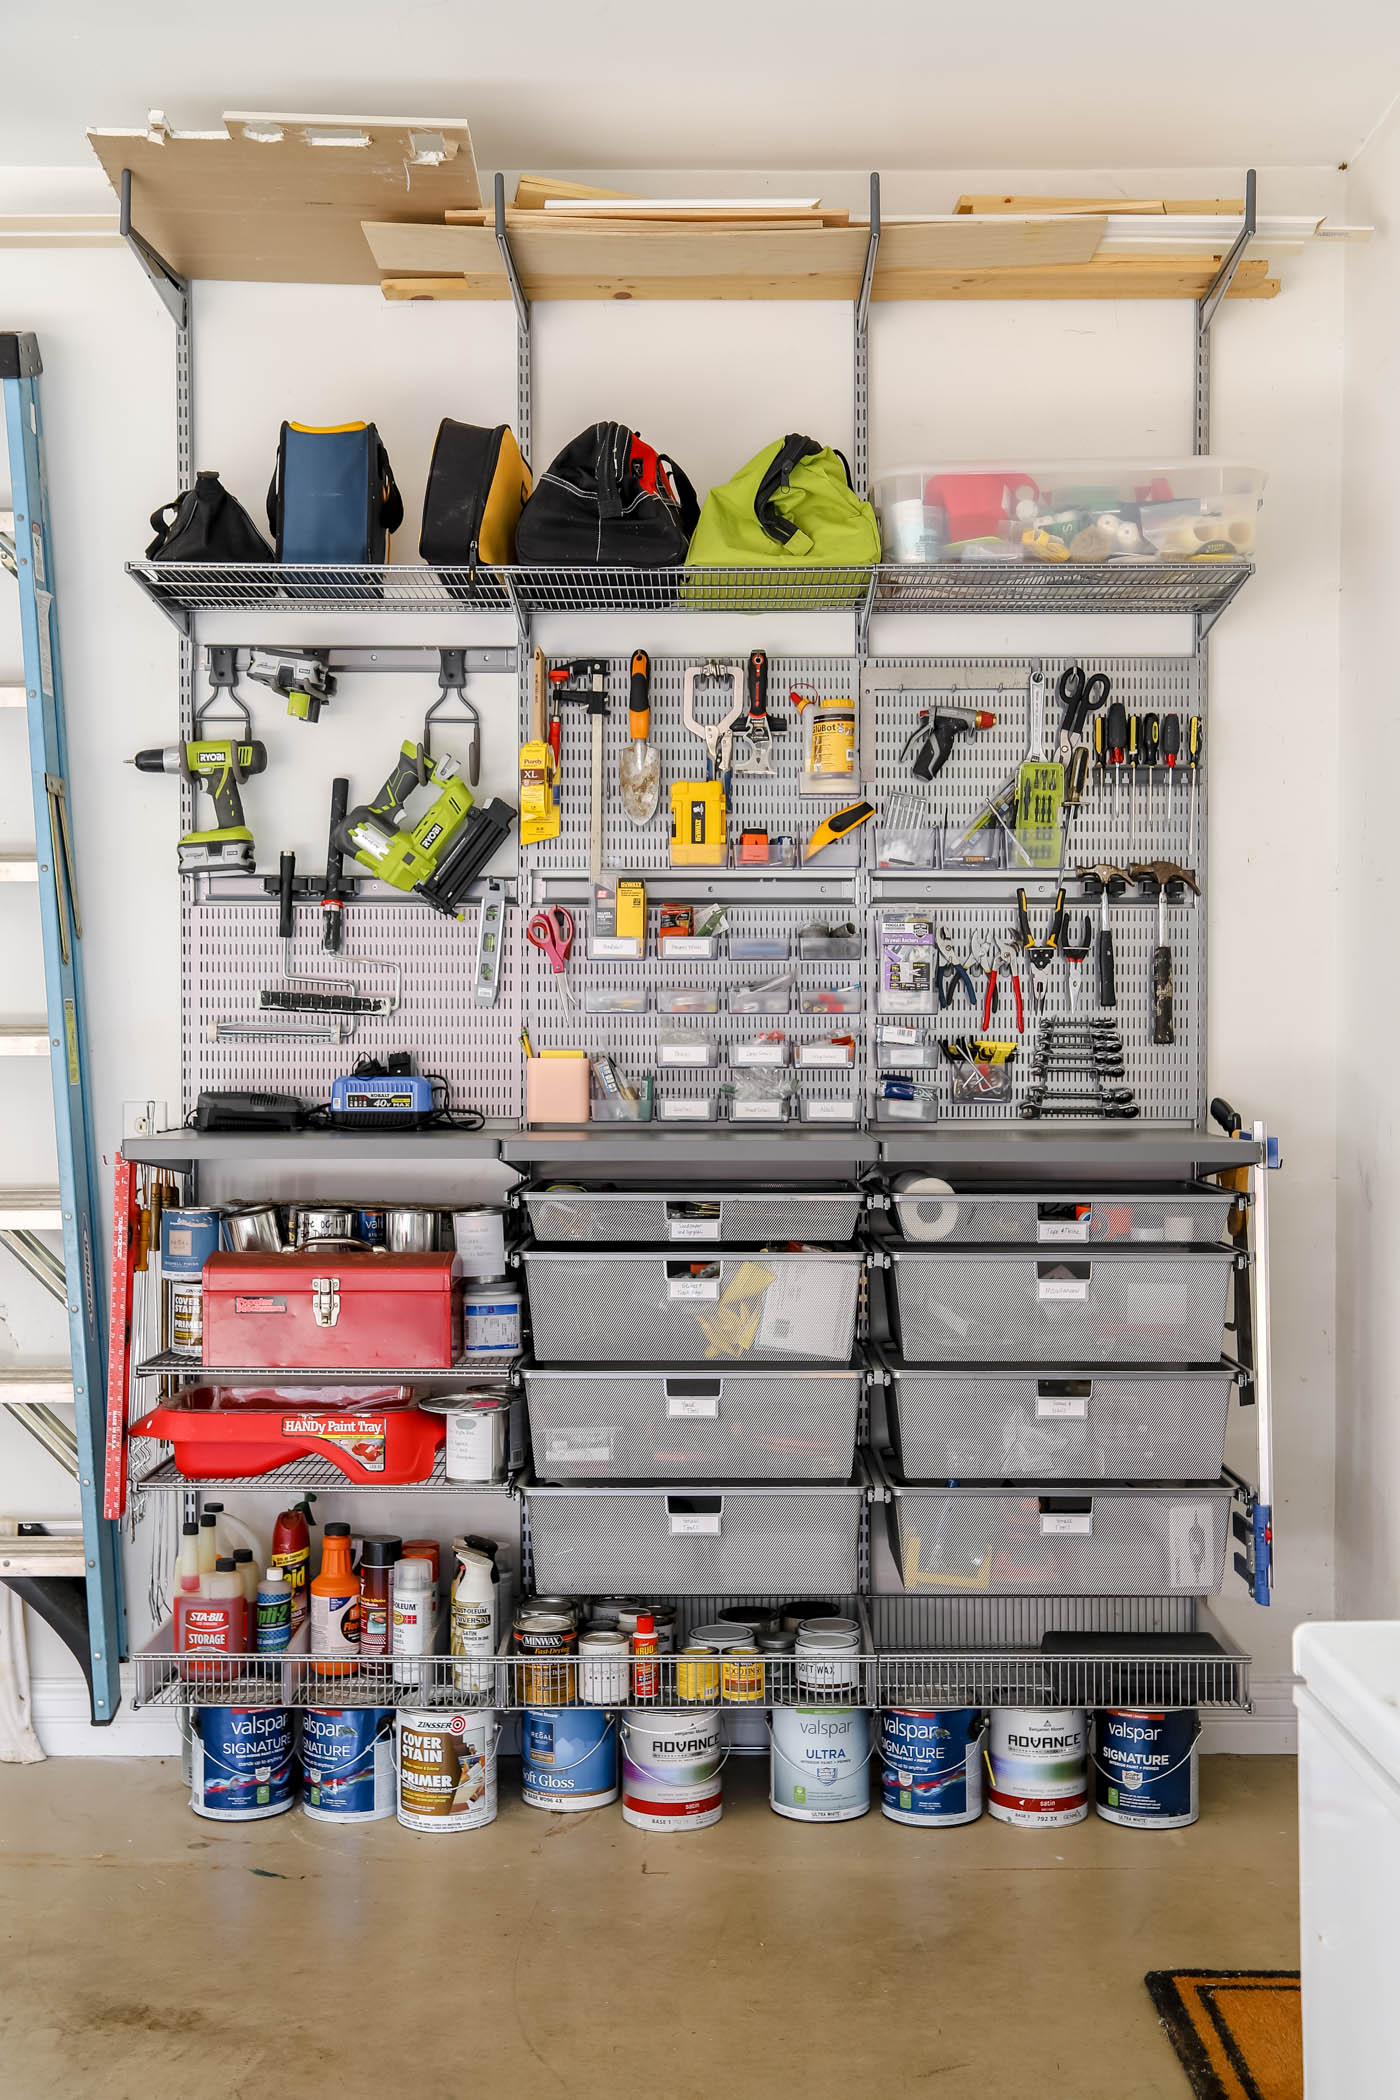 How to Organize a Messy Garage